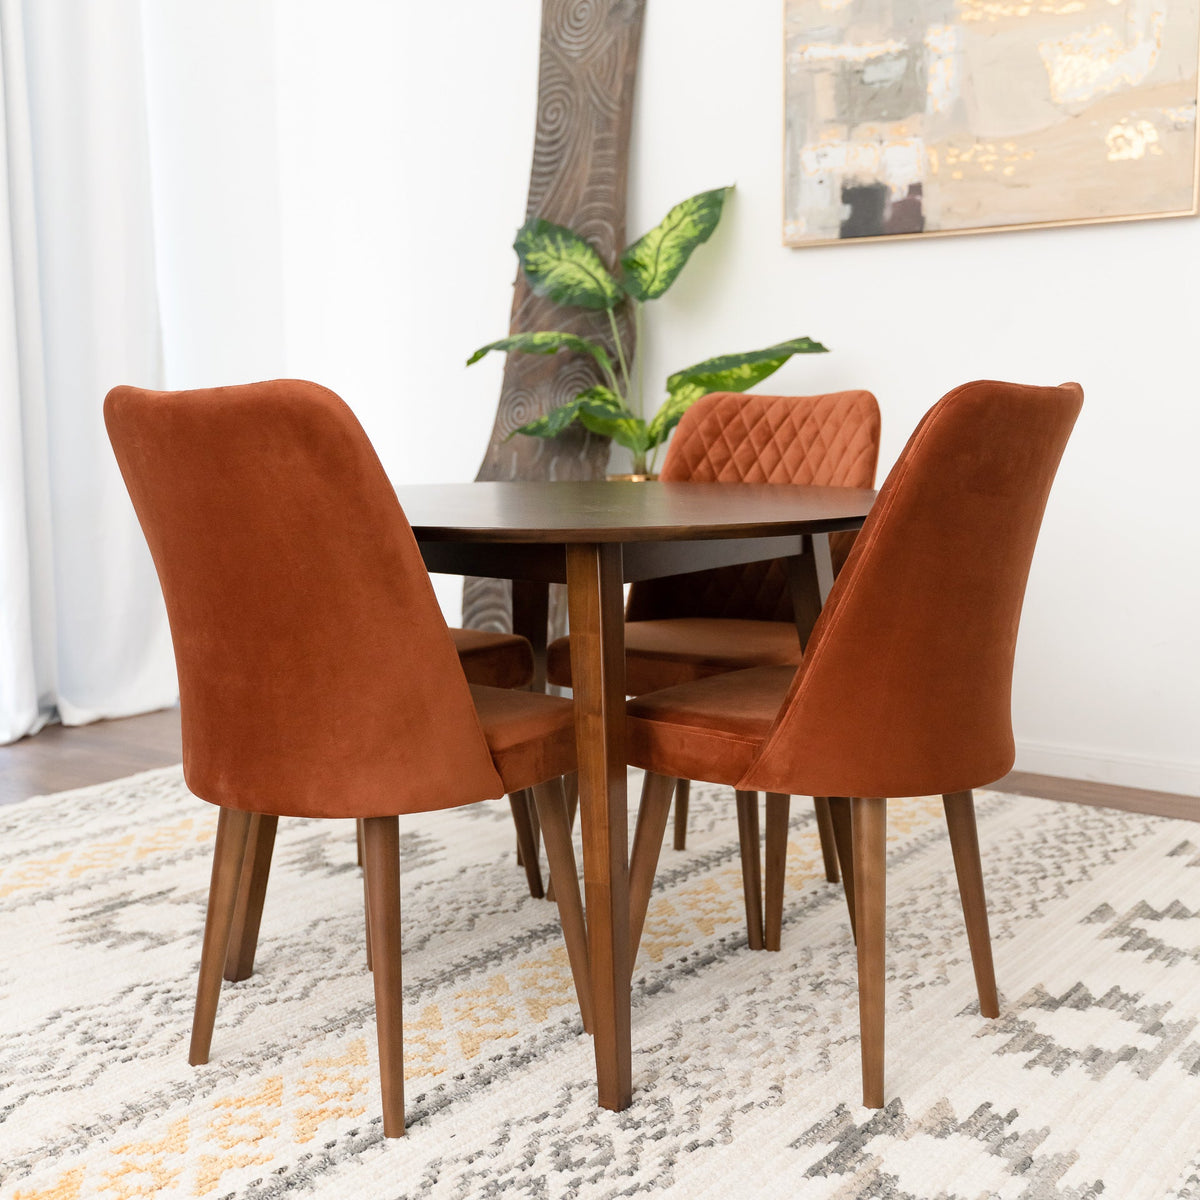 Palmer Dining set with 4 Evette Orange Dining Chairs (Walnut) | Mid in Mod | Houston TX | Best Furniture stores in Houston